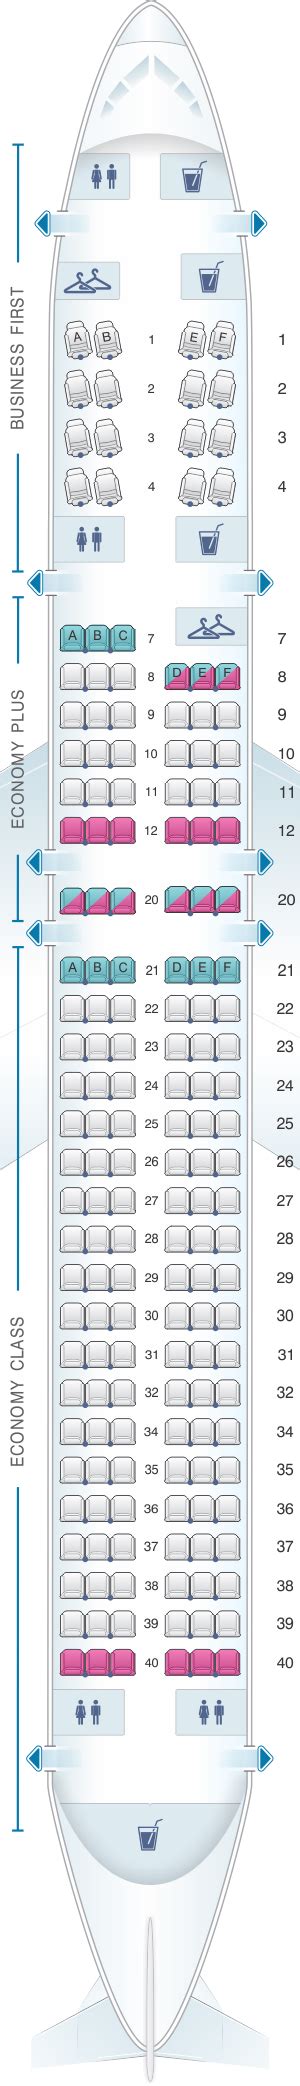 United Airlines Aircraft Seating Charts